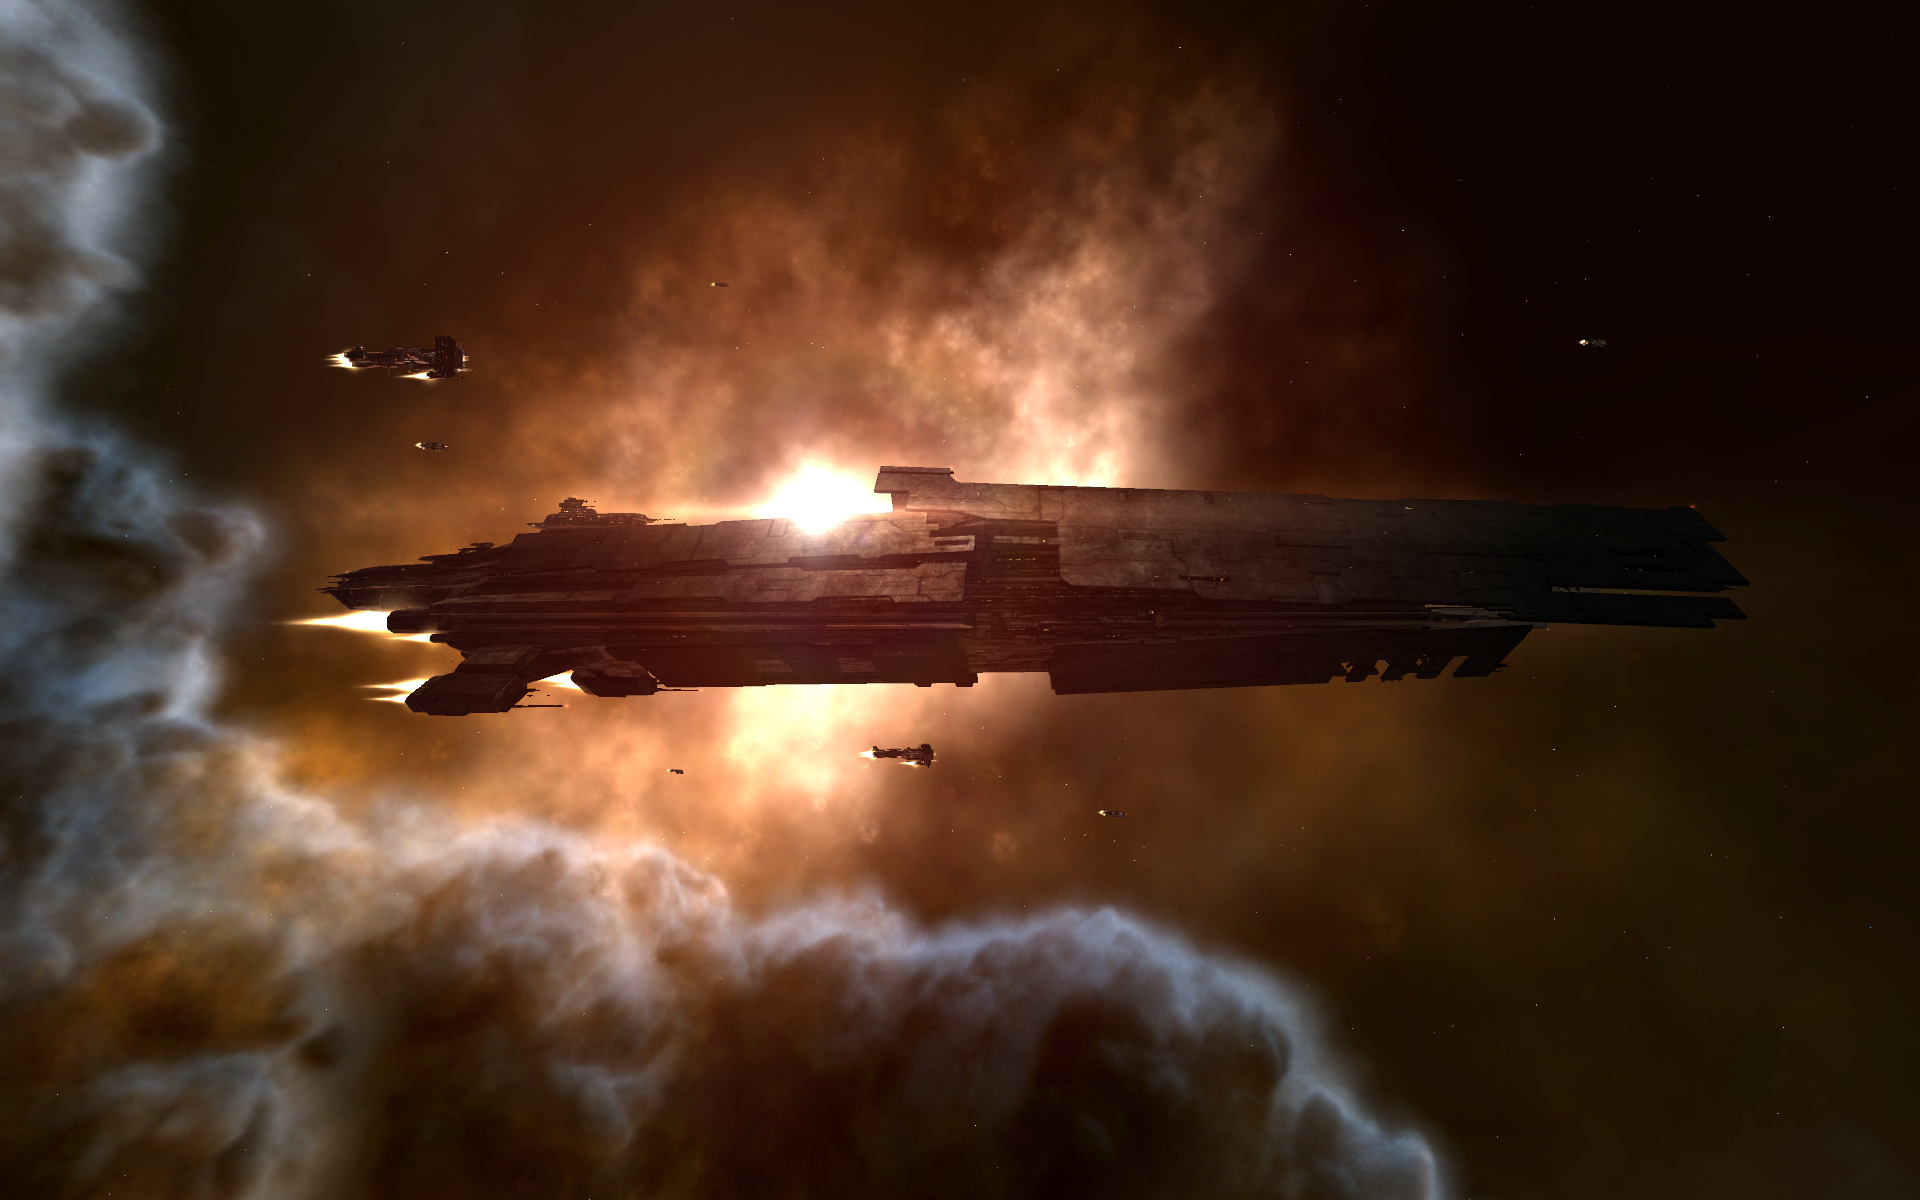 EVE Online HD Wallpaper | Background Image | 1920x1200